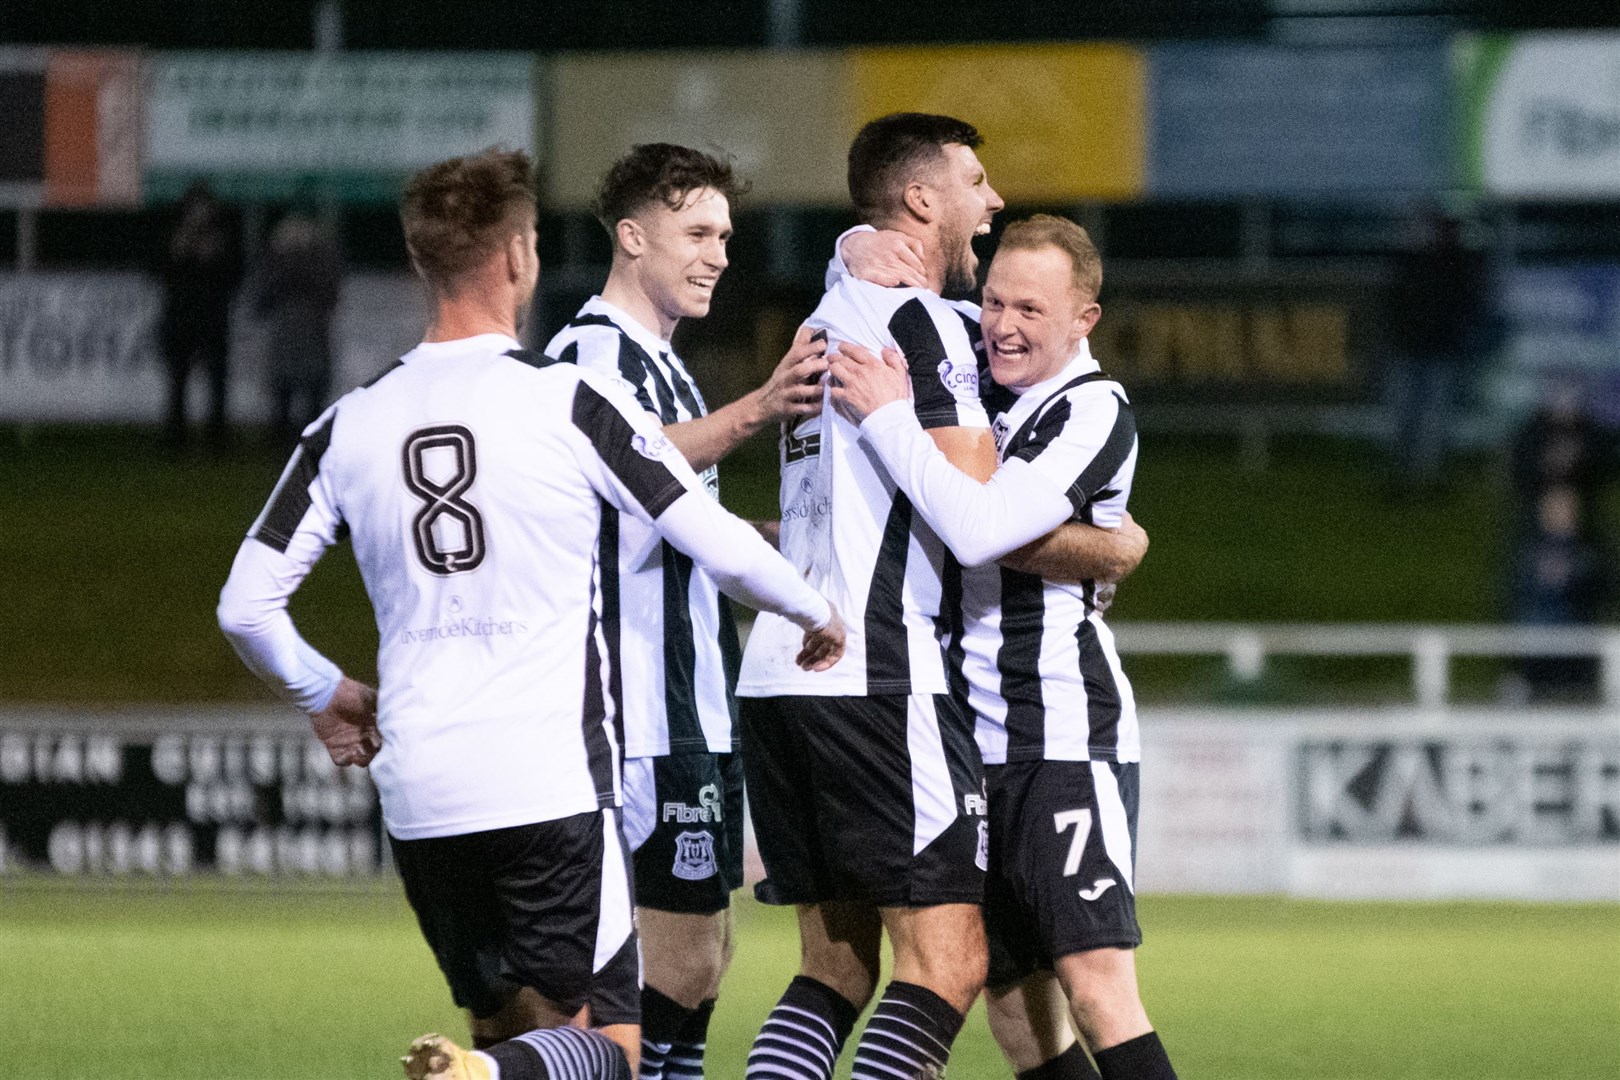 Elgin City's Russell Dingwall is congratulated after he scores a first half equaliser for the home side. ..Elgin City FC (2) vs Clyde FC (1) - SPFL League Two 2023/24 - Boroigh Briggs, Elgin 30/01/2024...Picture: Daniel Forsyth..